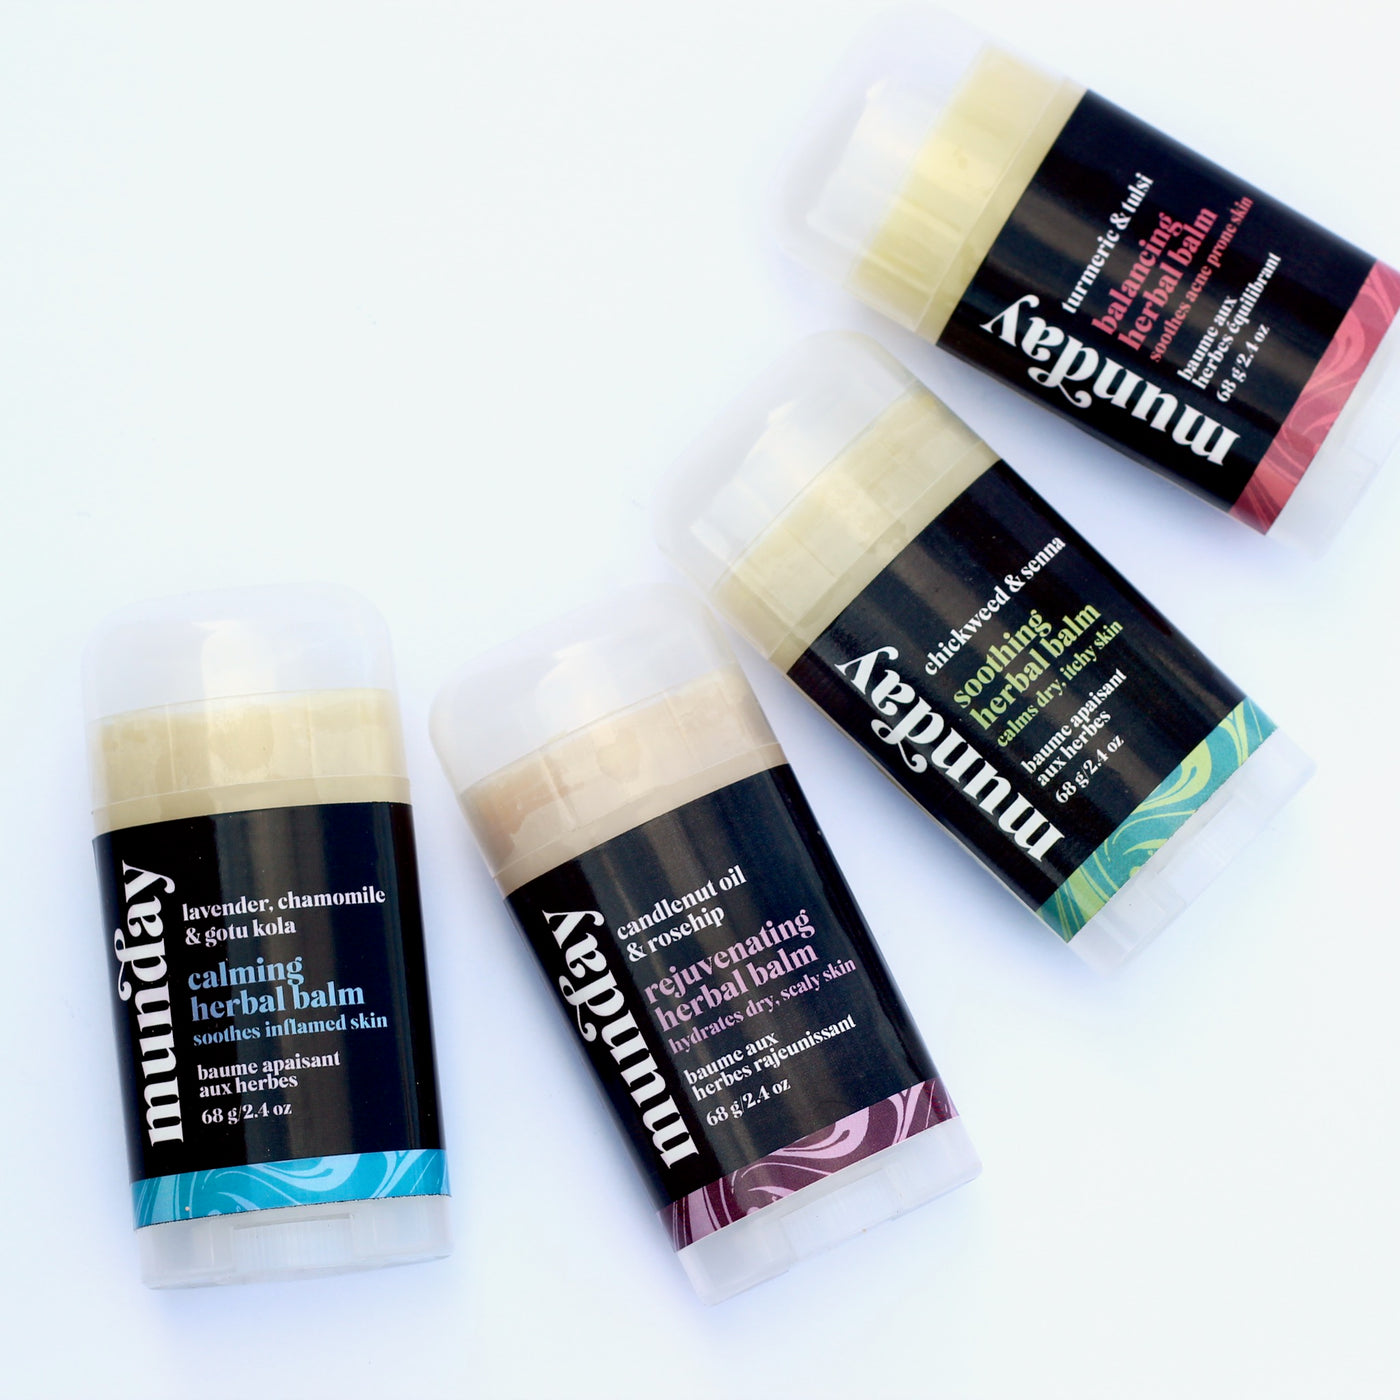 Herbal Balms in a twist-up tube for easy application on dry areas like elbows, knees and shins